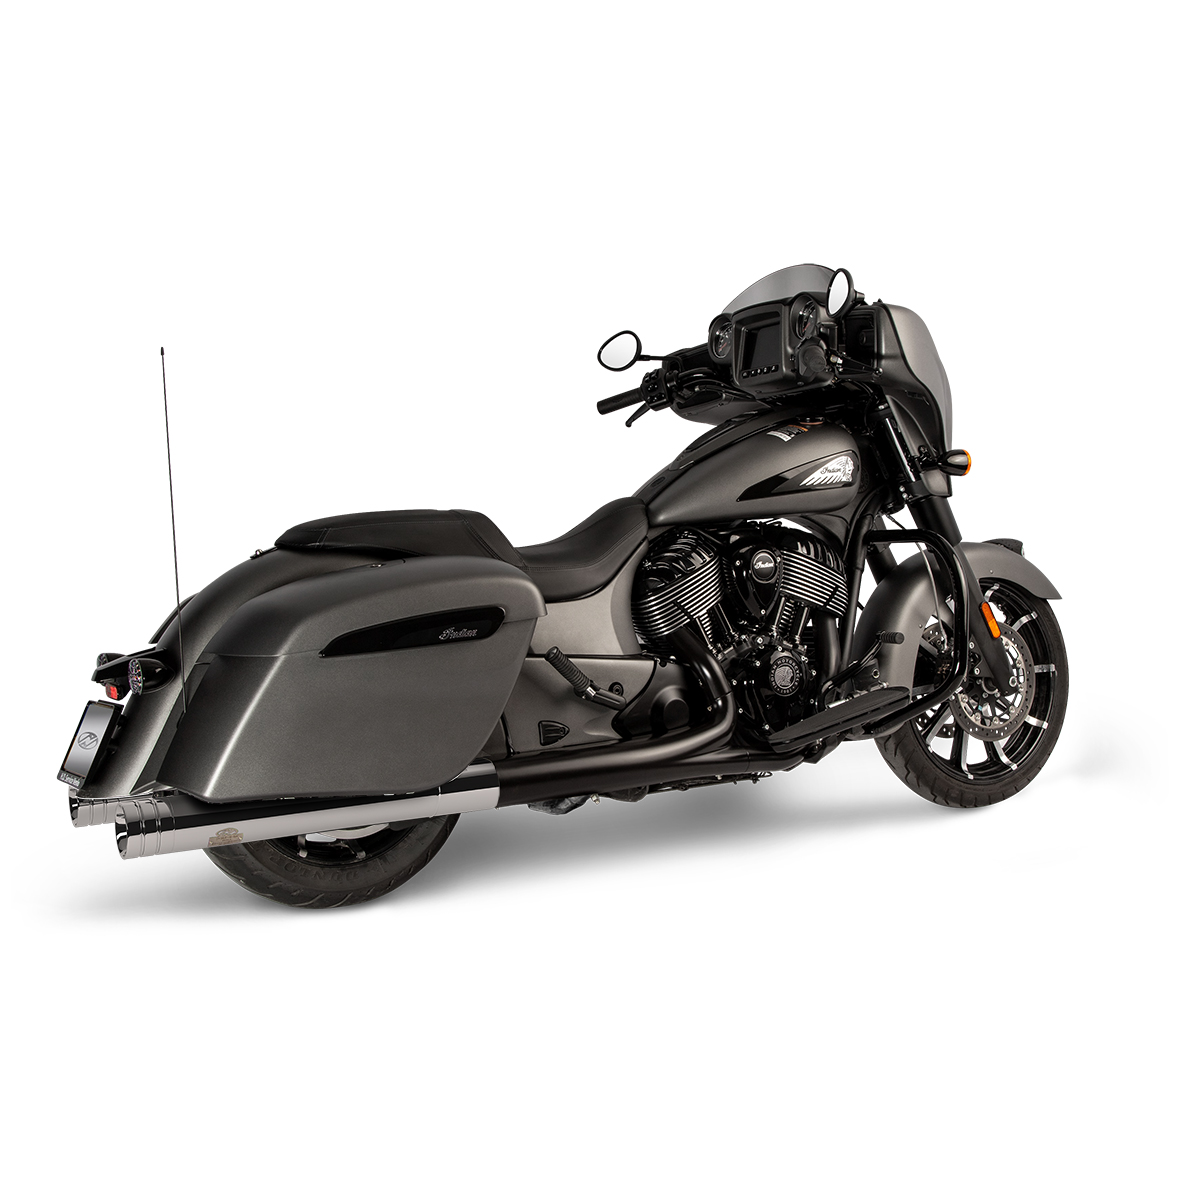 Jekill & Hyde Exhaust with Electronically Adjustable Noise Valve for 2020 Indian Chieftain 111CID Models & 2020 Indian Springfield 111CID Models